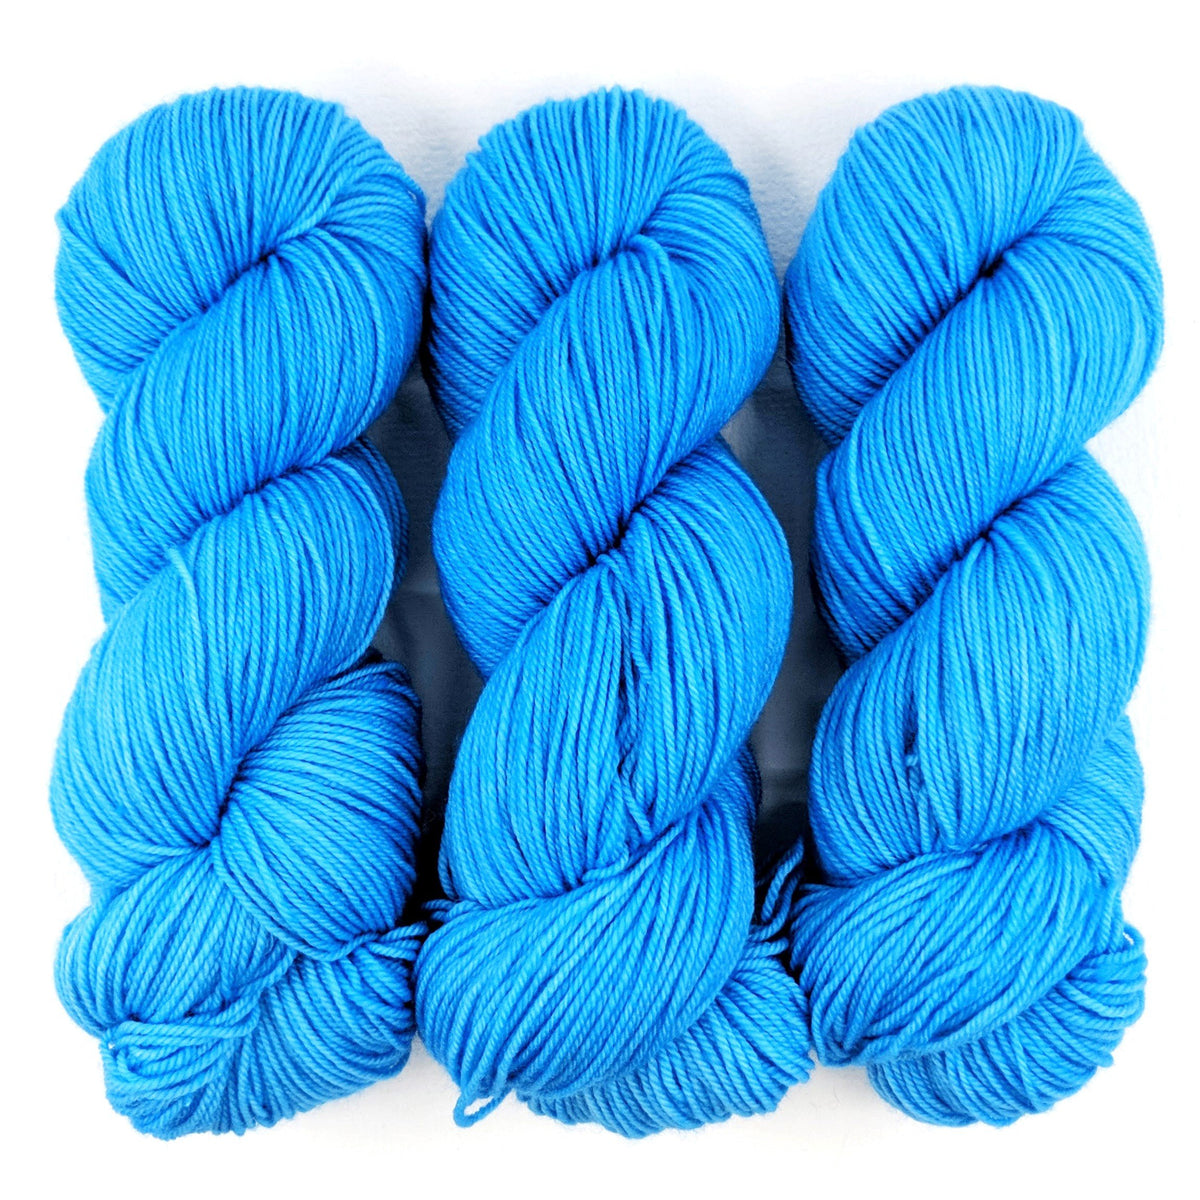 Nothing But Blue Skies - Passion 8 Fingering - Dyed Stock